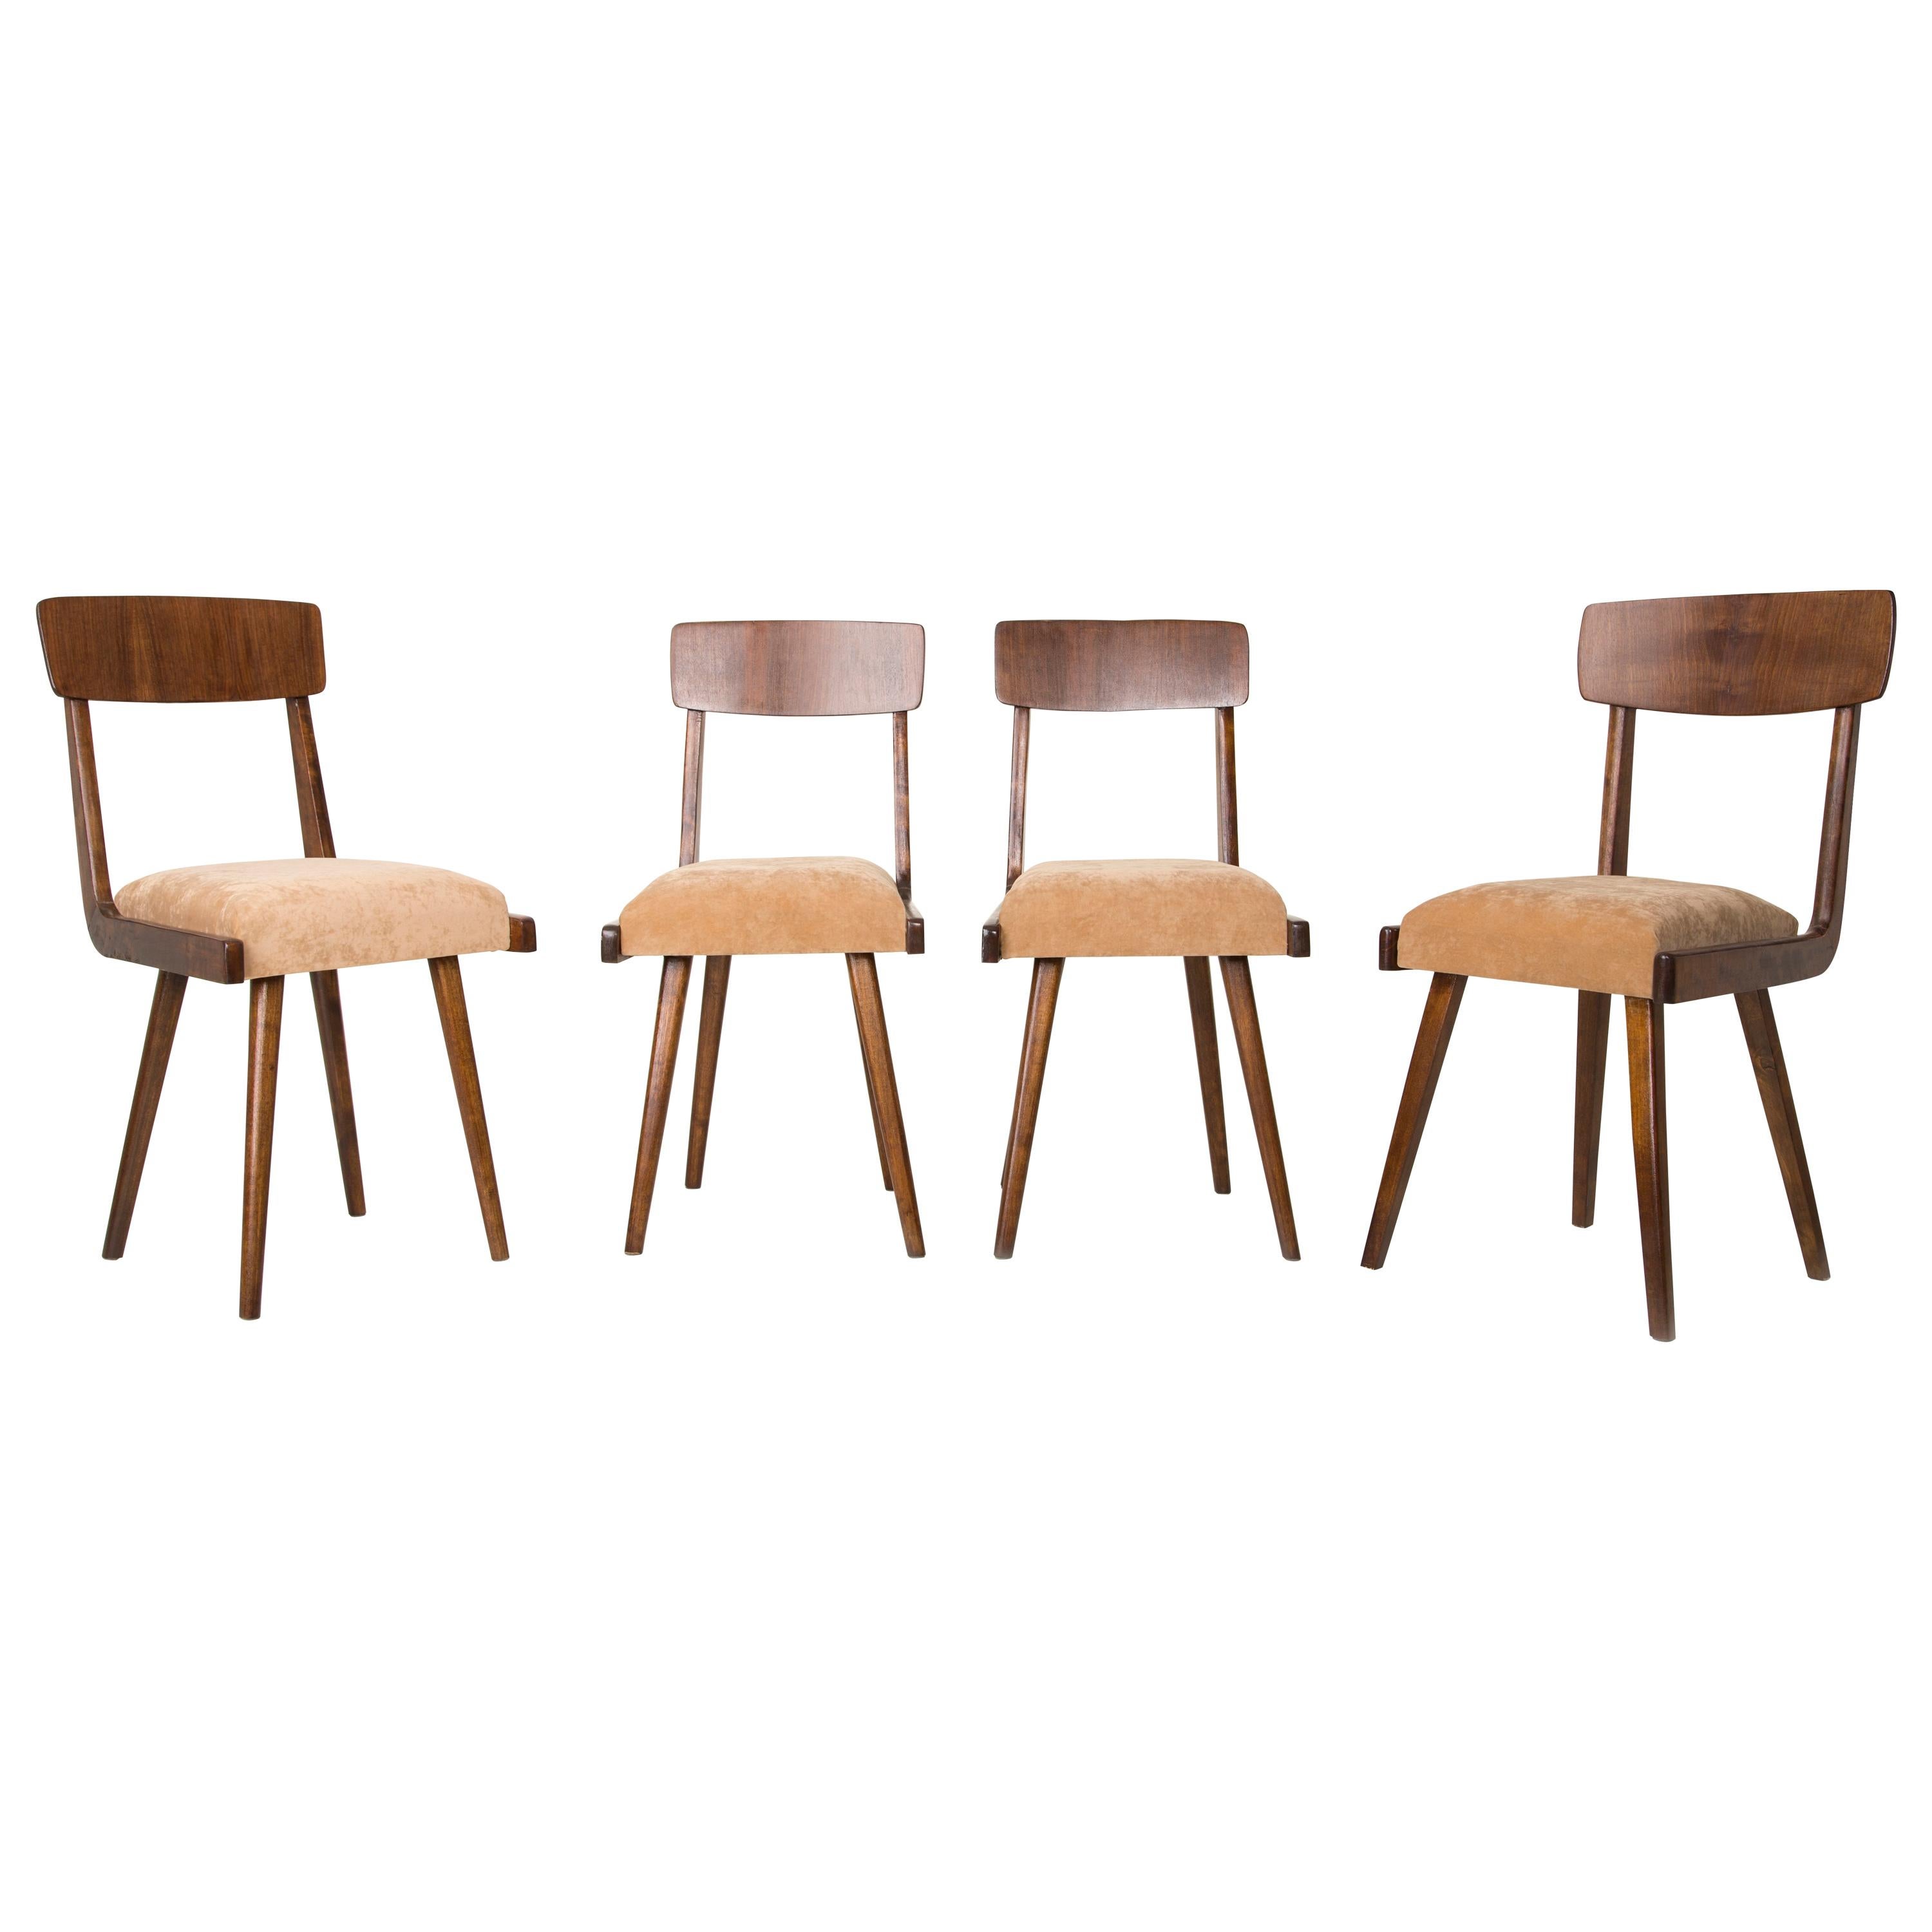 Set of Four 20th Century Gazelle Beige Wood Chairs, 1960s